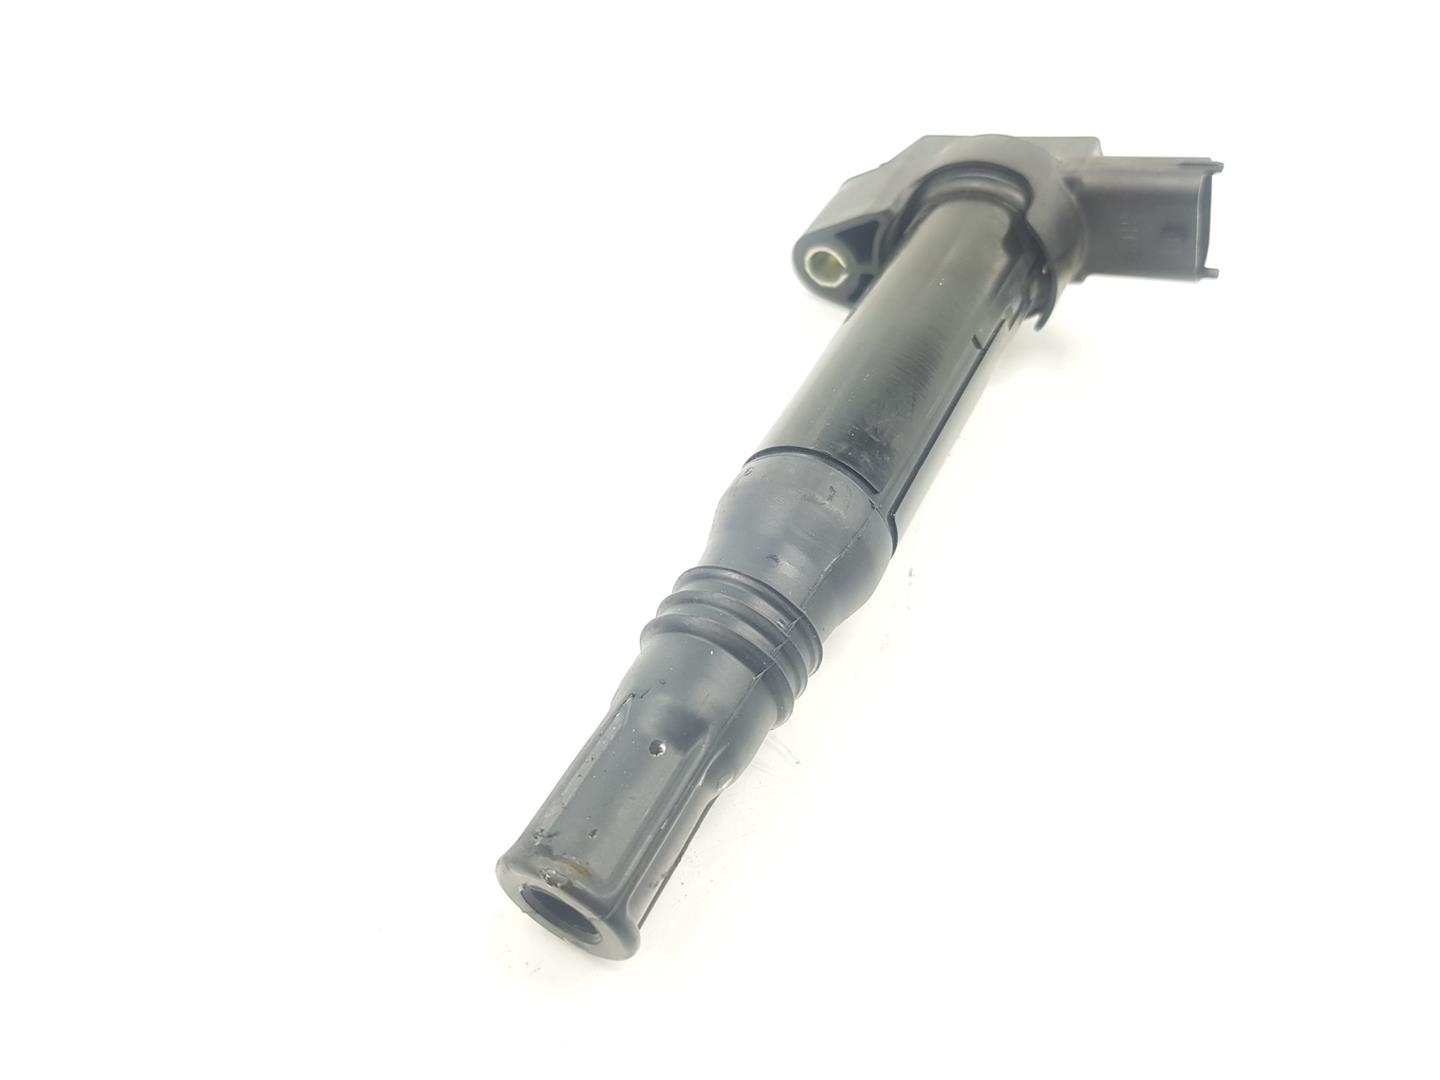 OPEL Corsa F (2019-2023) High Voltage Ignition Coil 9671214580, 9671214580, 1151CB2222DL 24224268